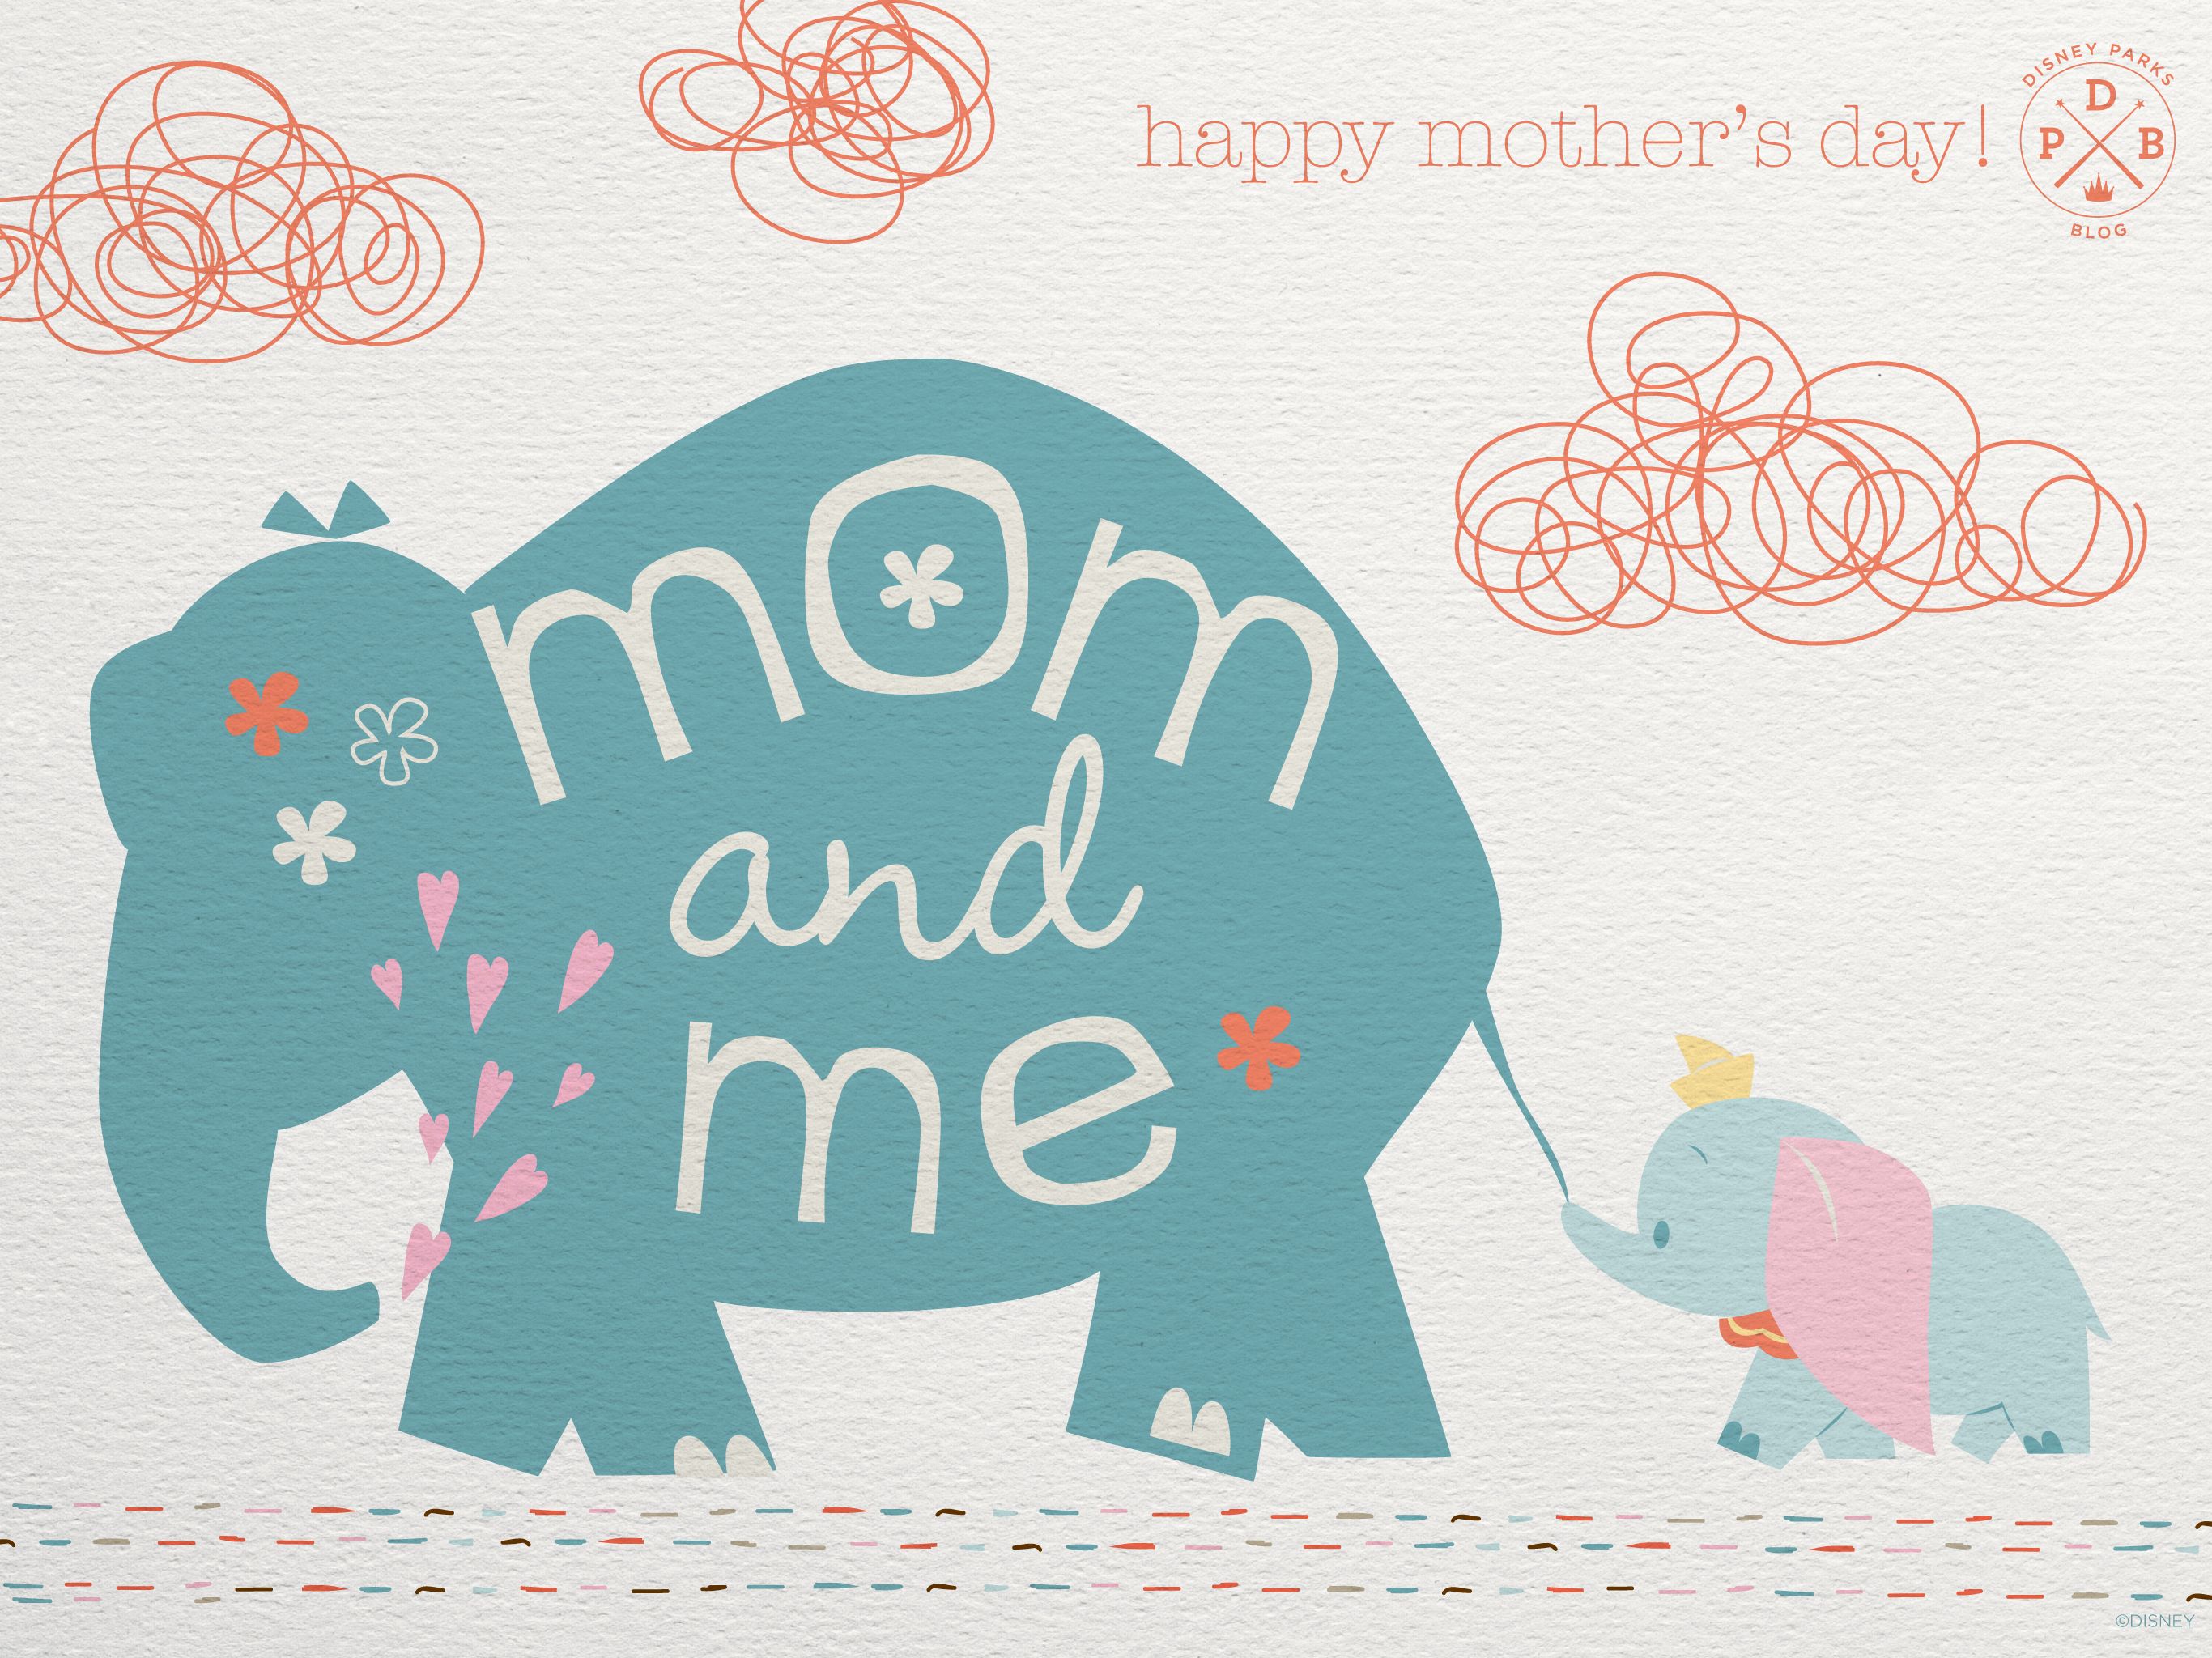 You can also upload and share your favorite Disney Mother's Day wallpa...